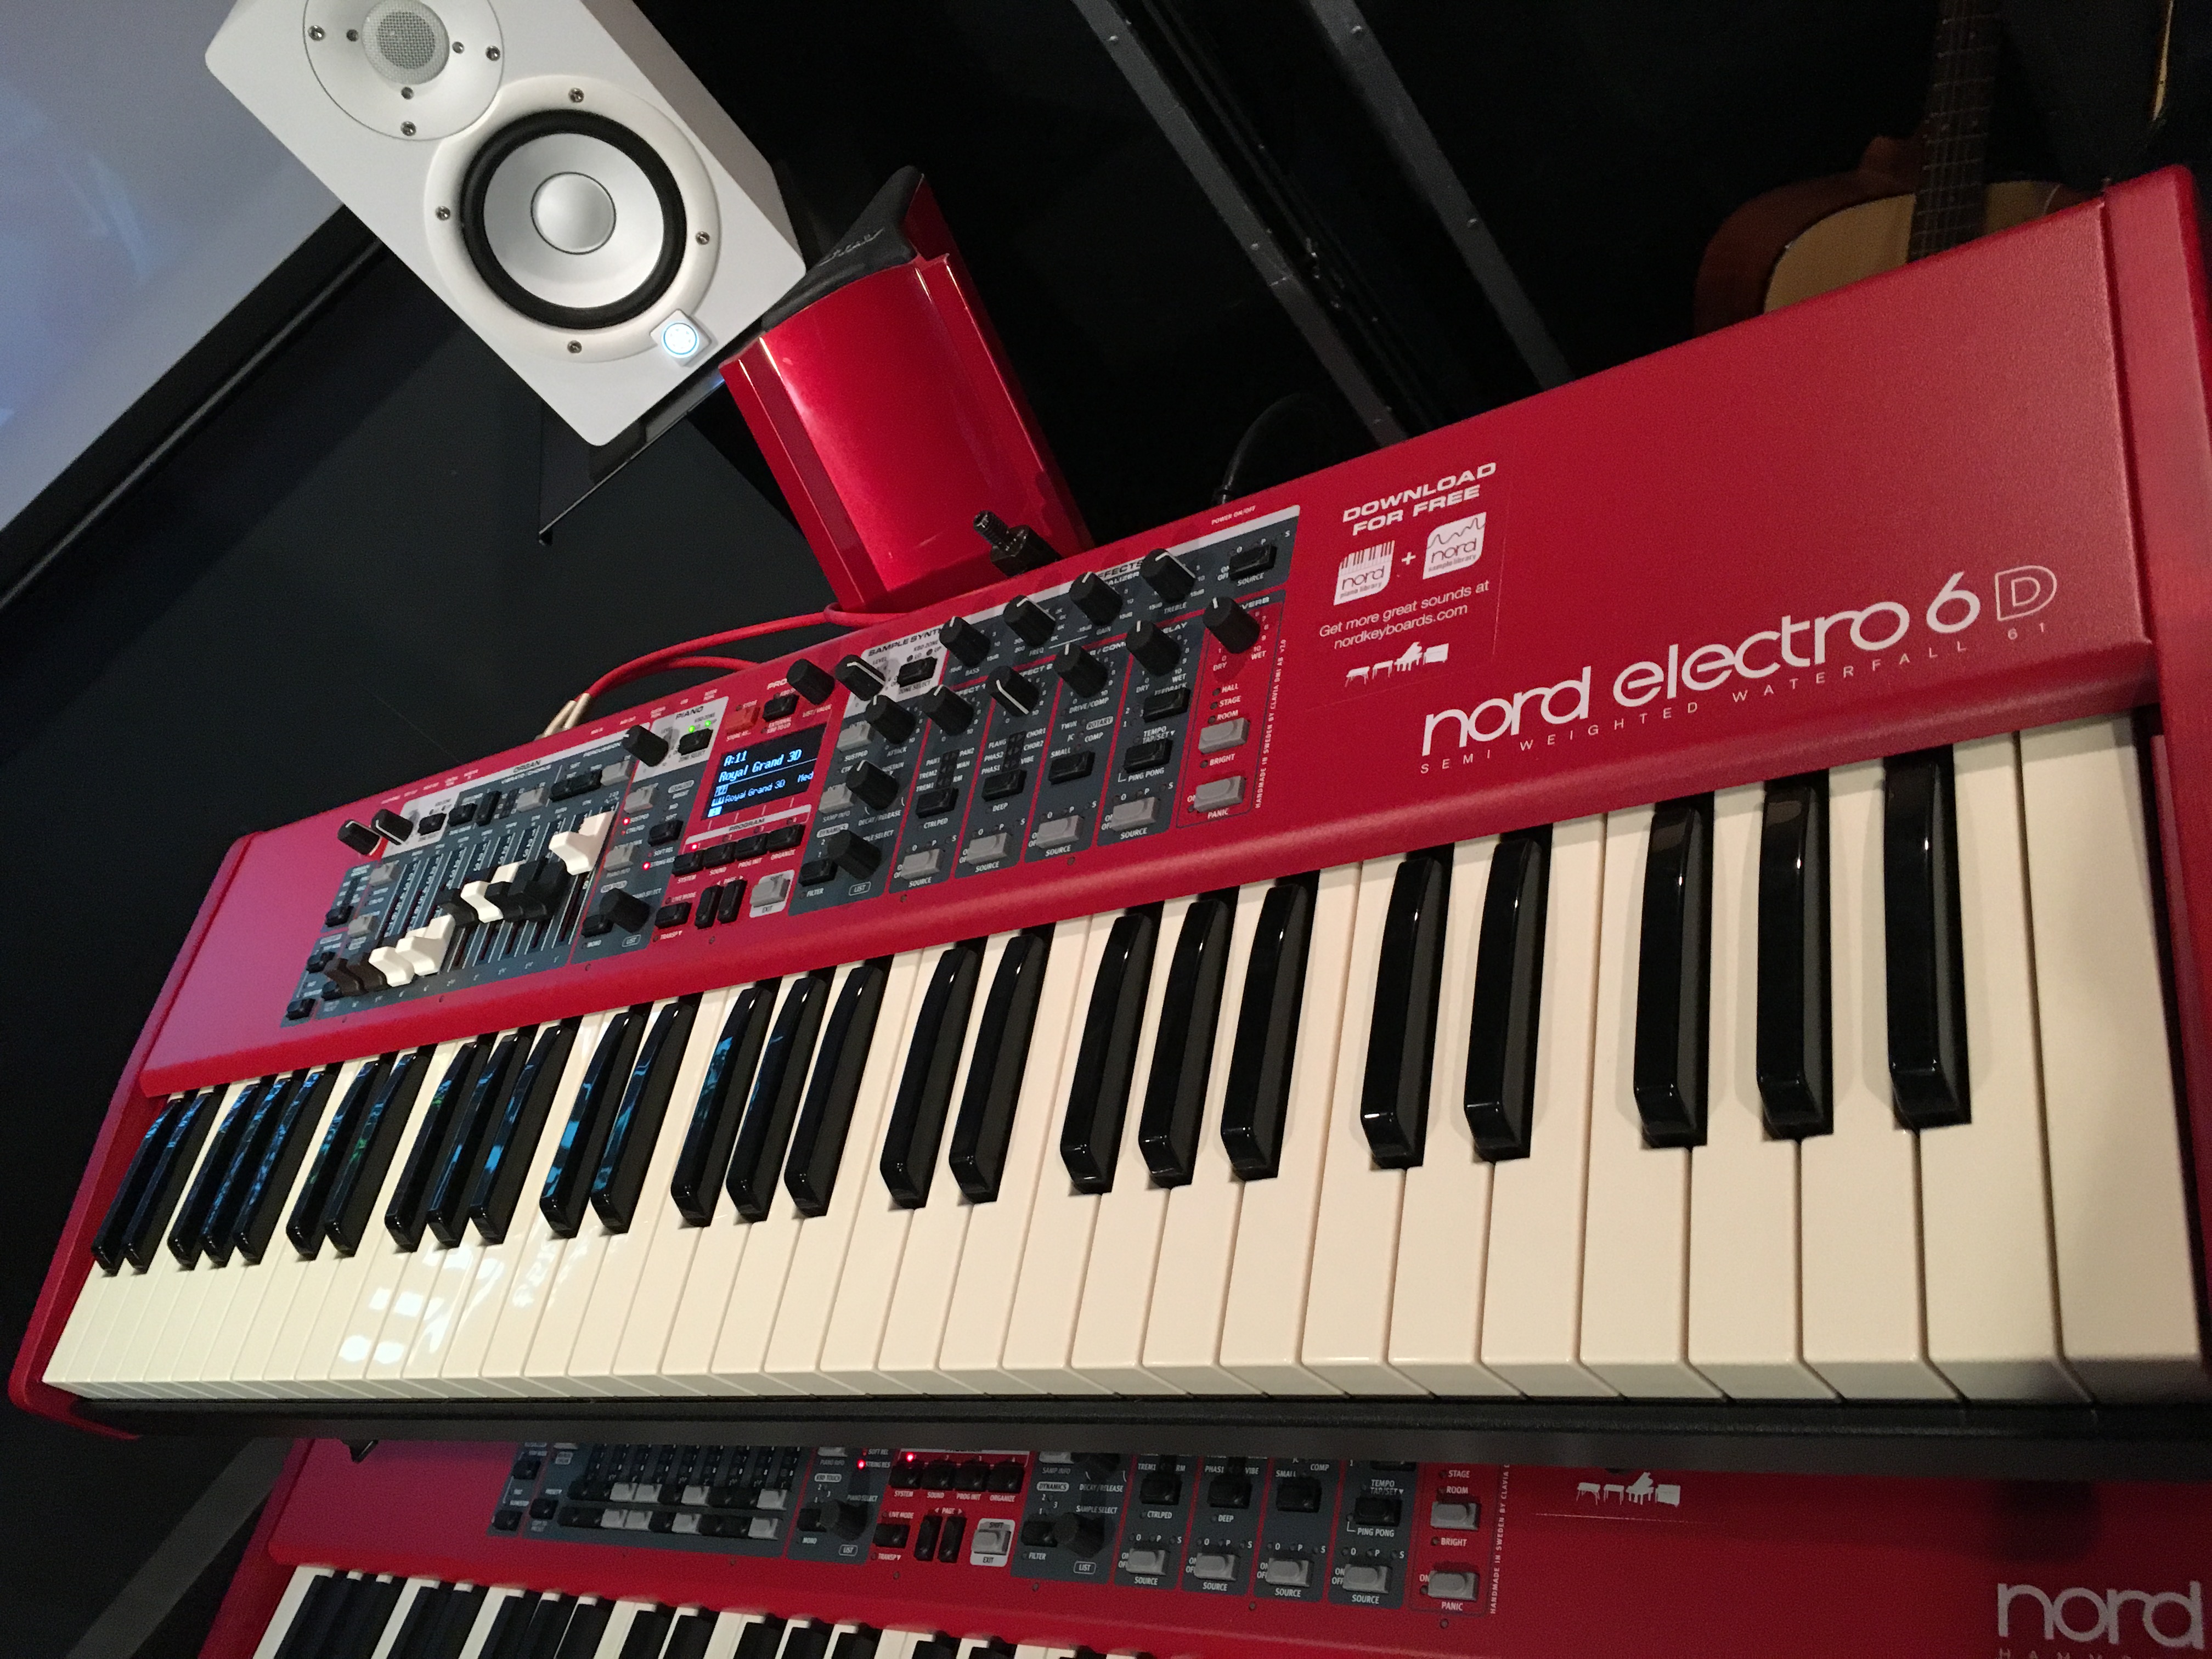 nord electro 6Dシリーズ 日発売が決定！機能をチェック